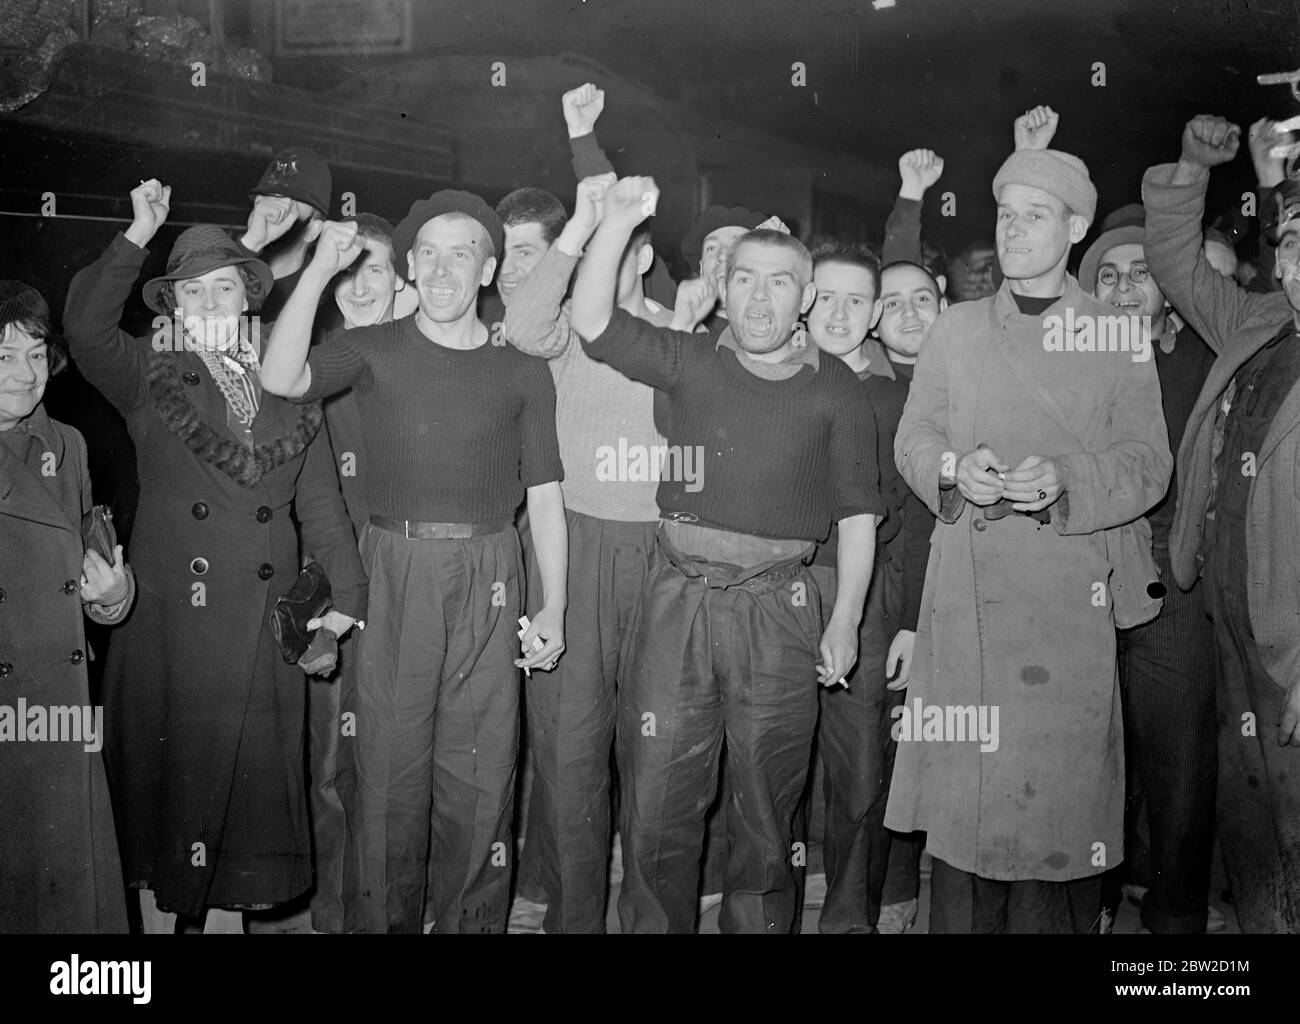 67 British volunteers who were released by General Franco in exchange for Italians in Spanish government hands, arrived at Victoria Station, London, on their return home. They had been imprisoned at San Sebastian. Photo shows: members of the party giving clenched fist salute on arrival at Victoria. 7 February 1939 Stock Photo